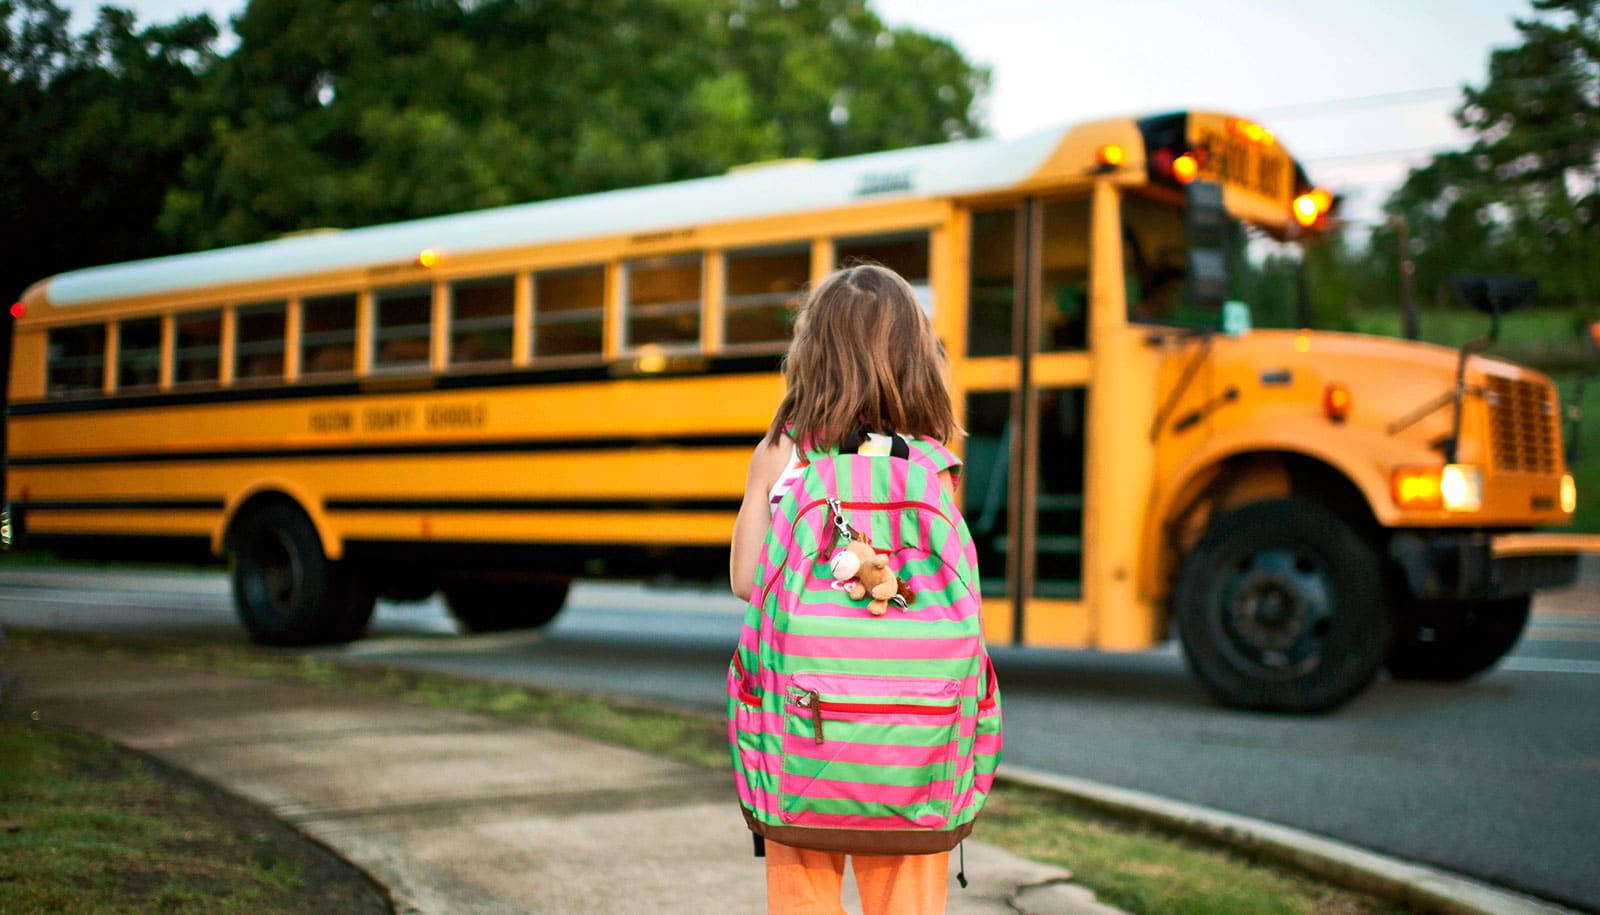 A young girl stands waiting on the sidewalk as a yellow school bus pulls up.